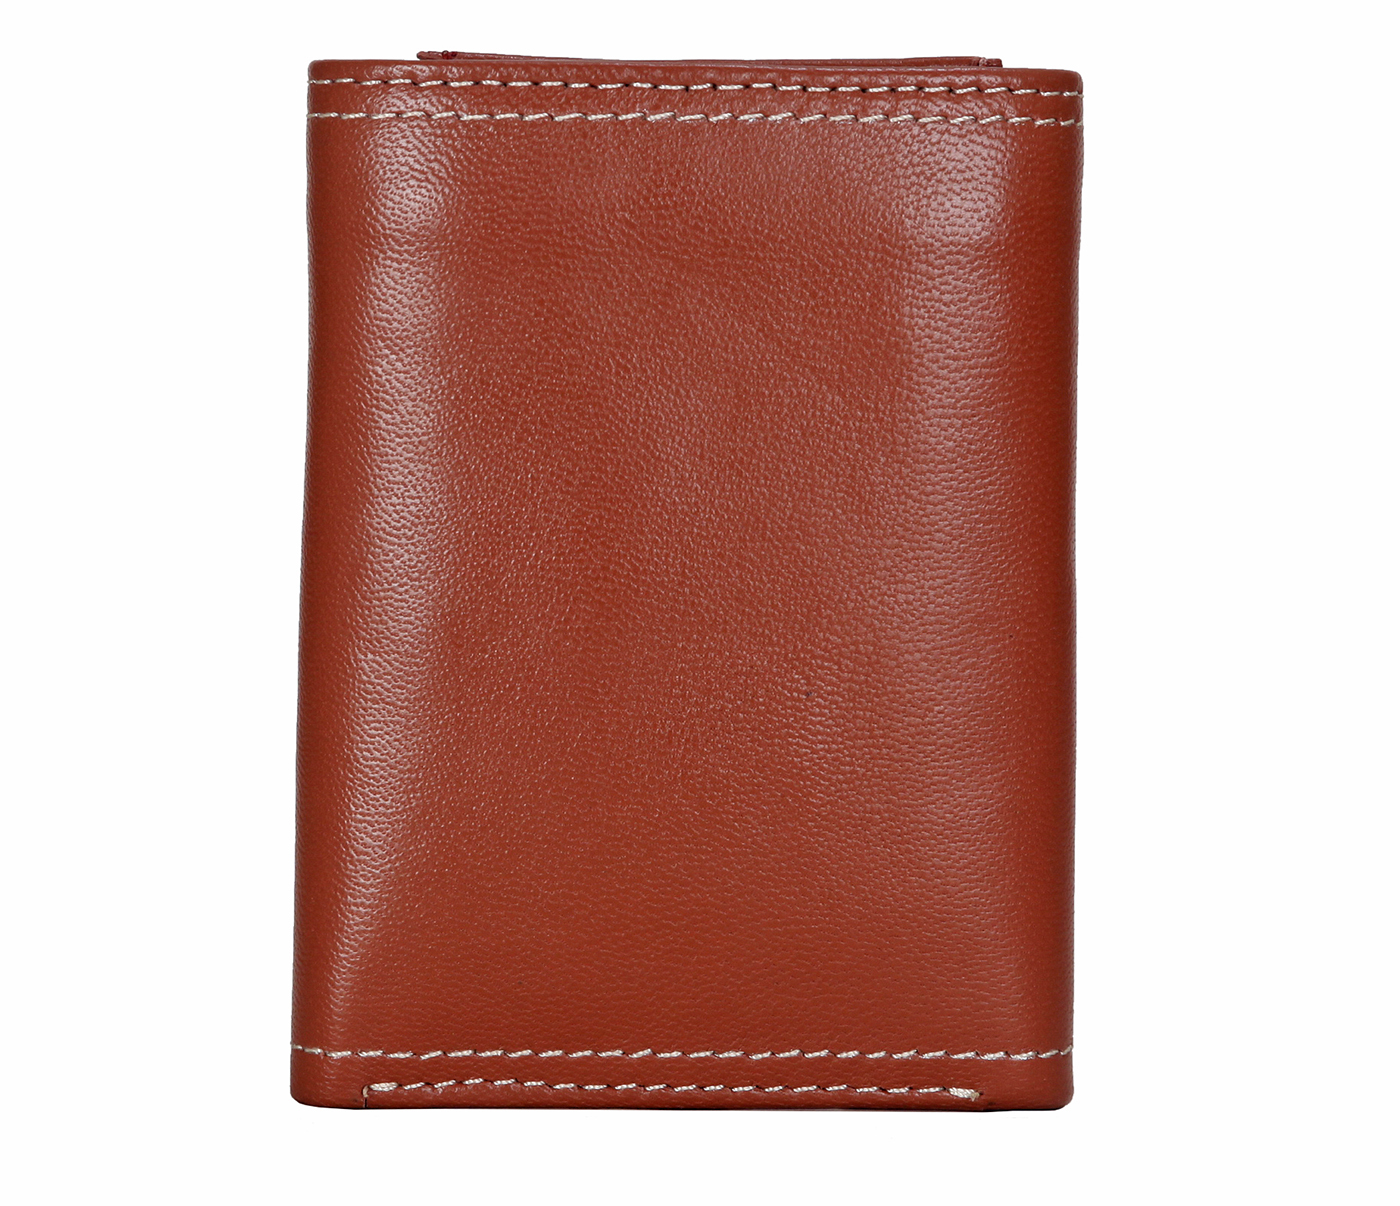 W282-Samuel-Mens's trifold wallet with photo id in Genuine Leather - Tan